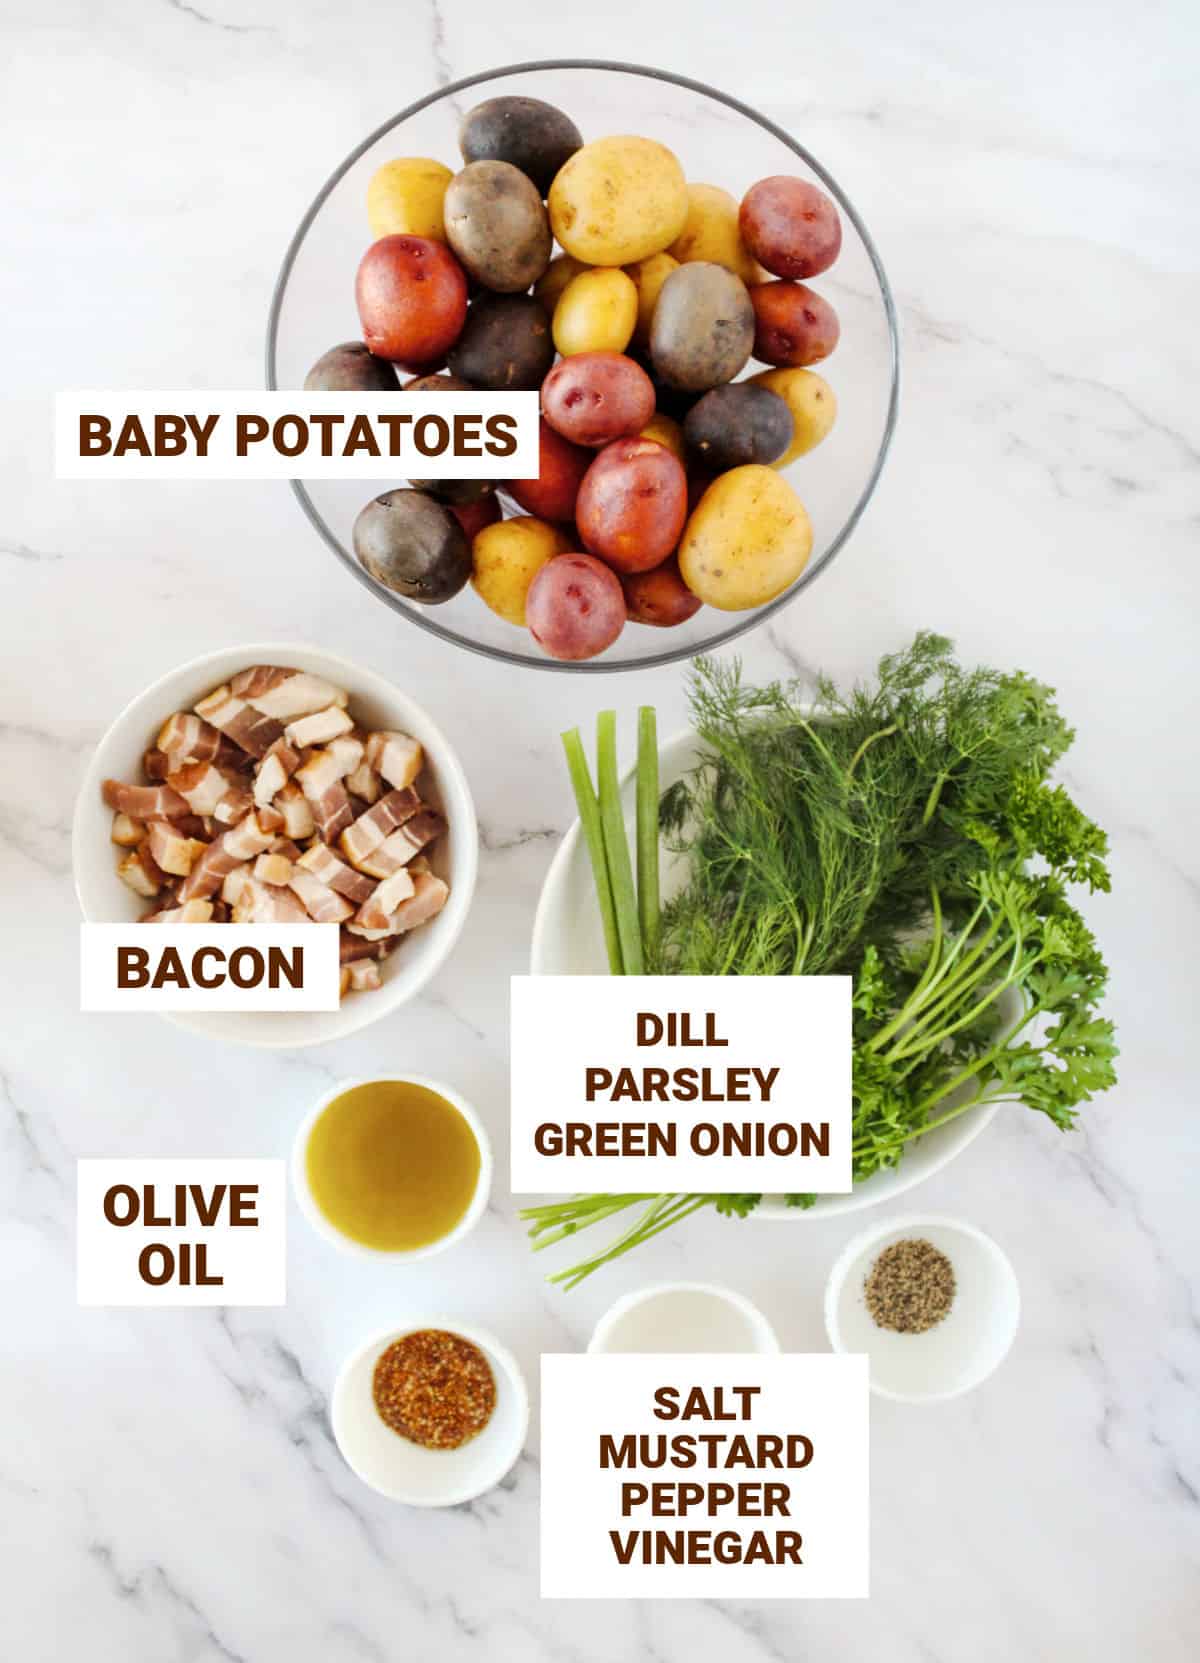 Ingredients for potato salad in bowls on a white marbled surface with text overlay including fresh herbs, bacon, oil, mustard, vinegar.